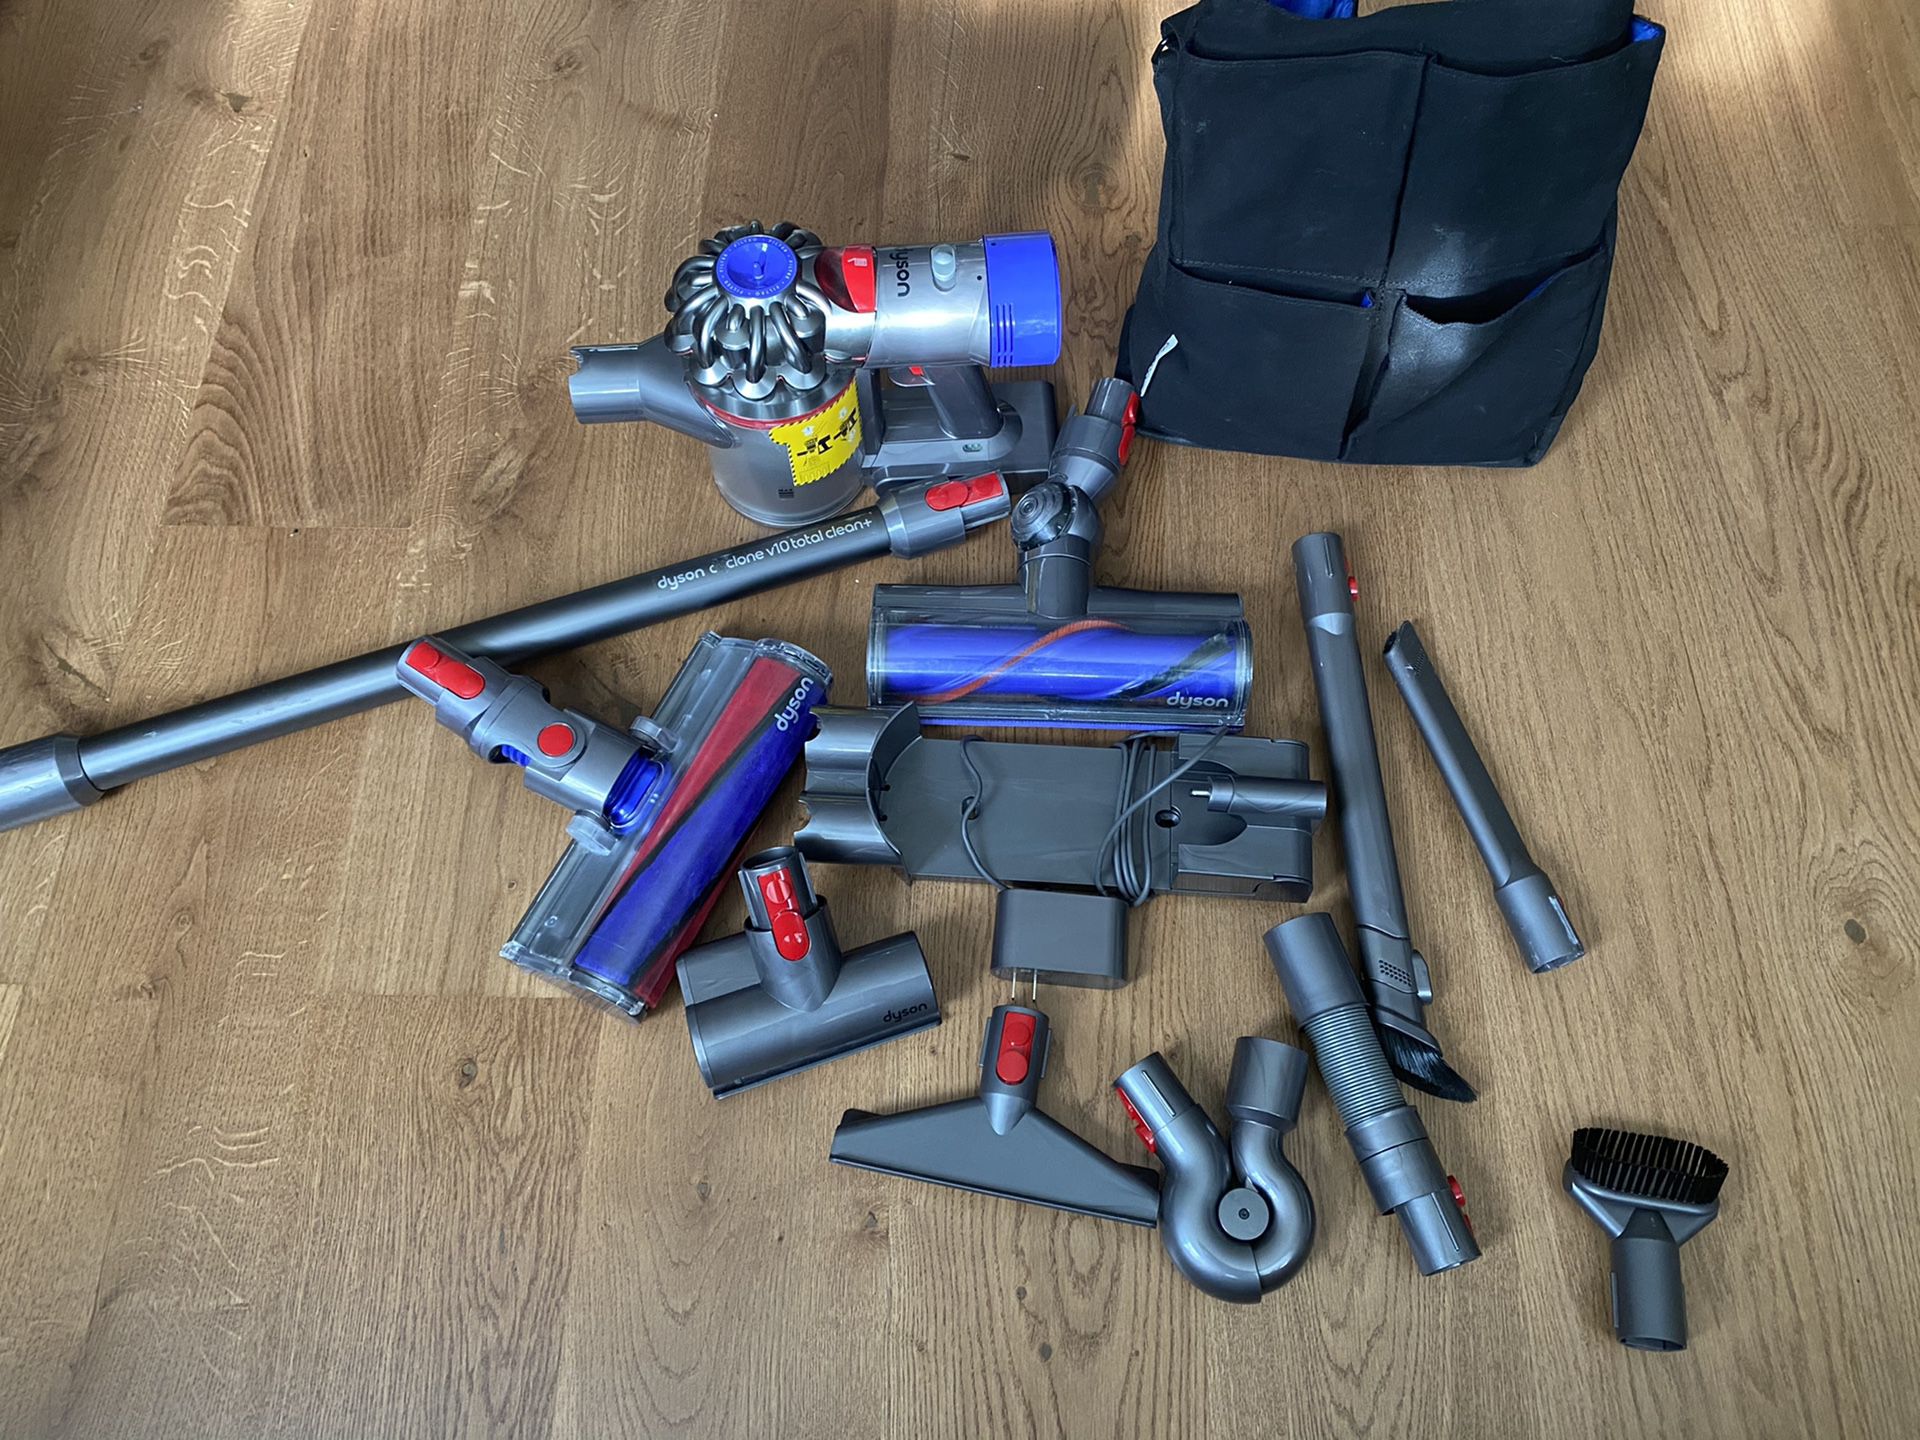 Dyson V8 V10 SV10 total clean+ Absolute Cordless Vacuum with extra accessories & bag